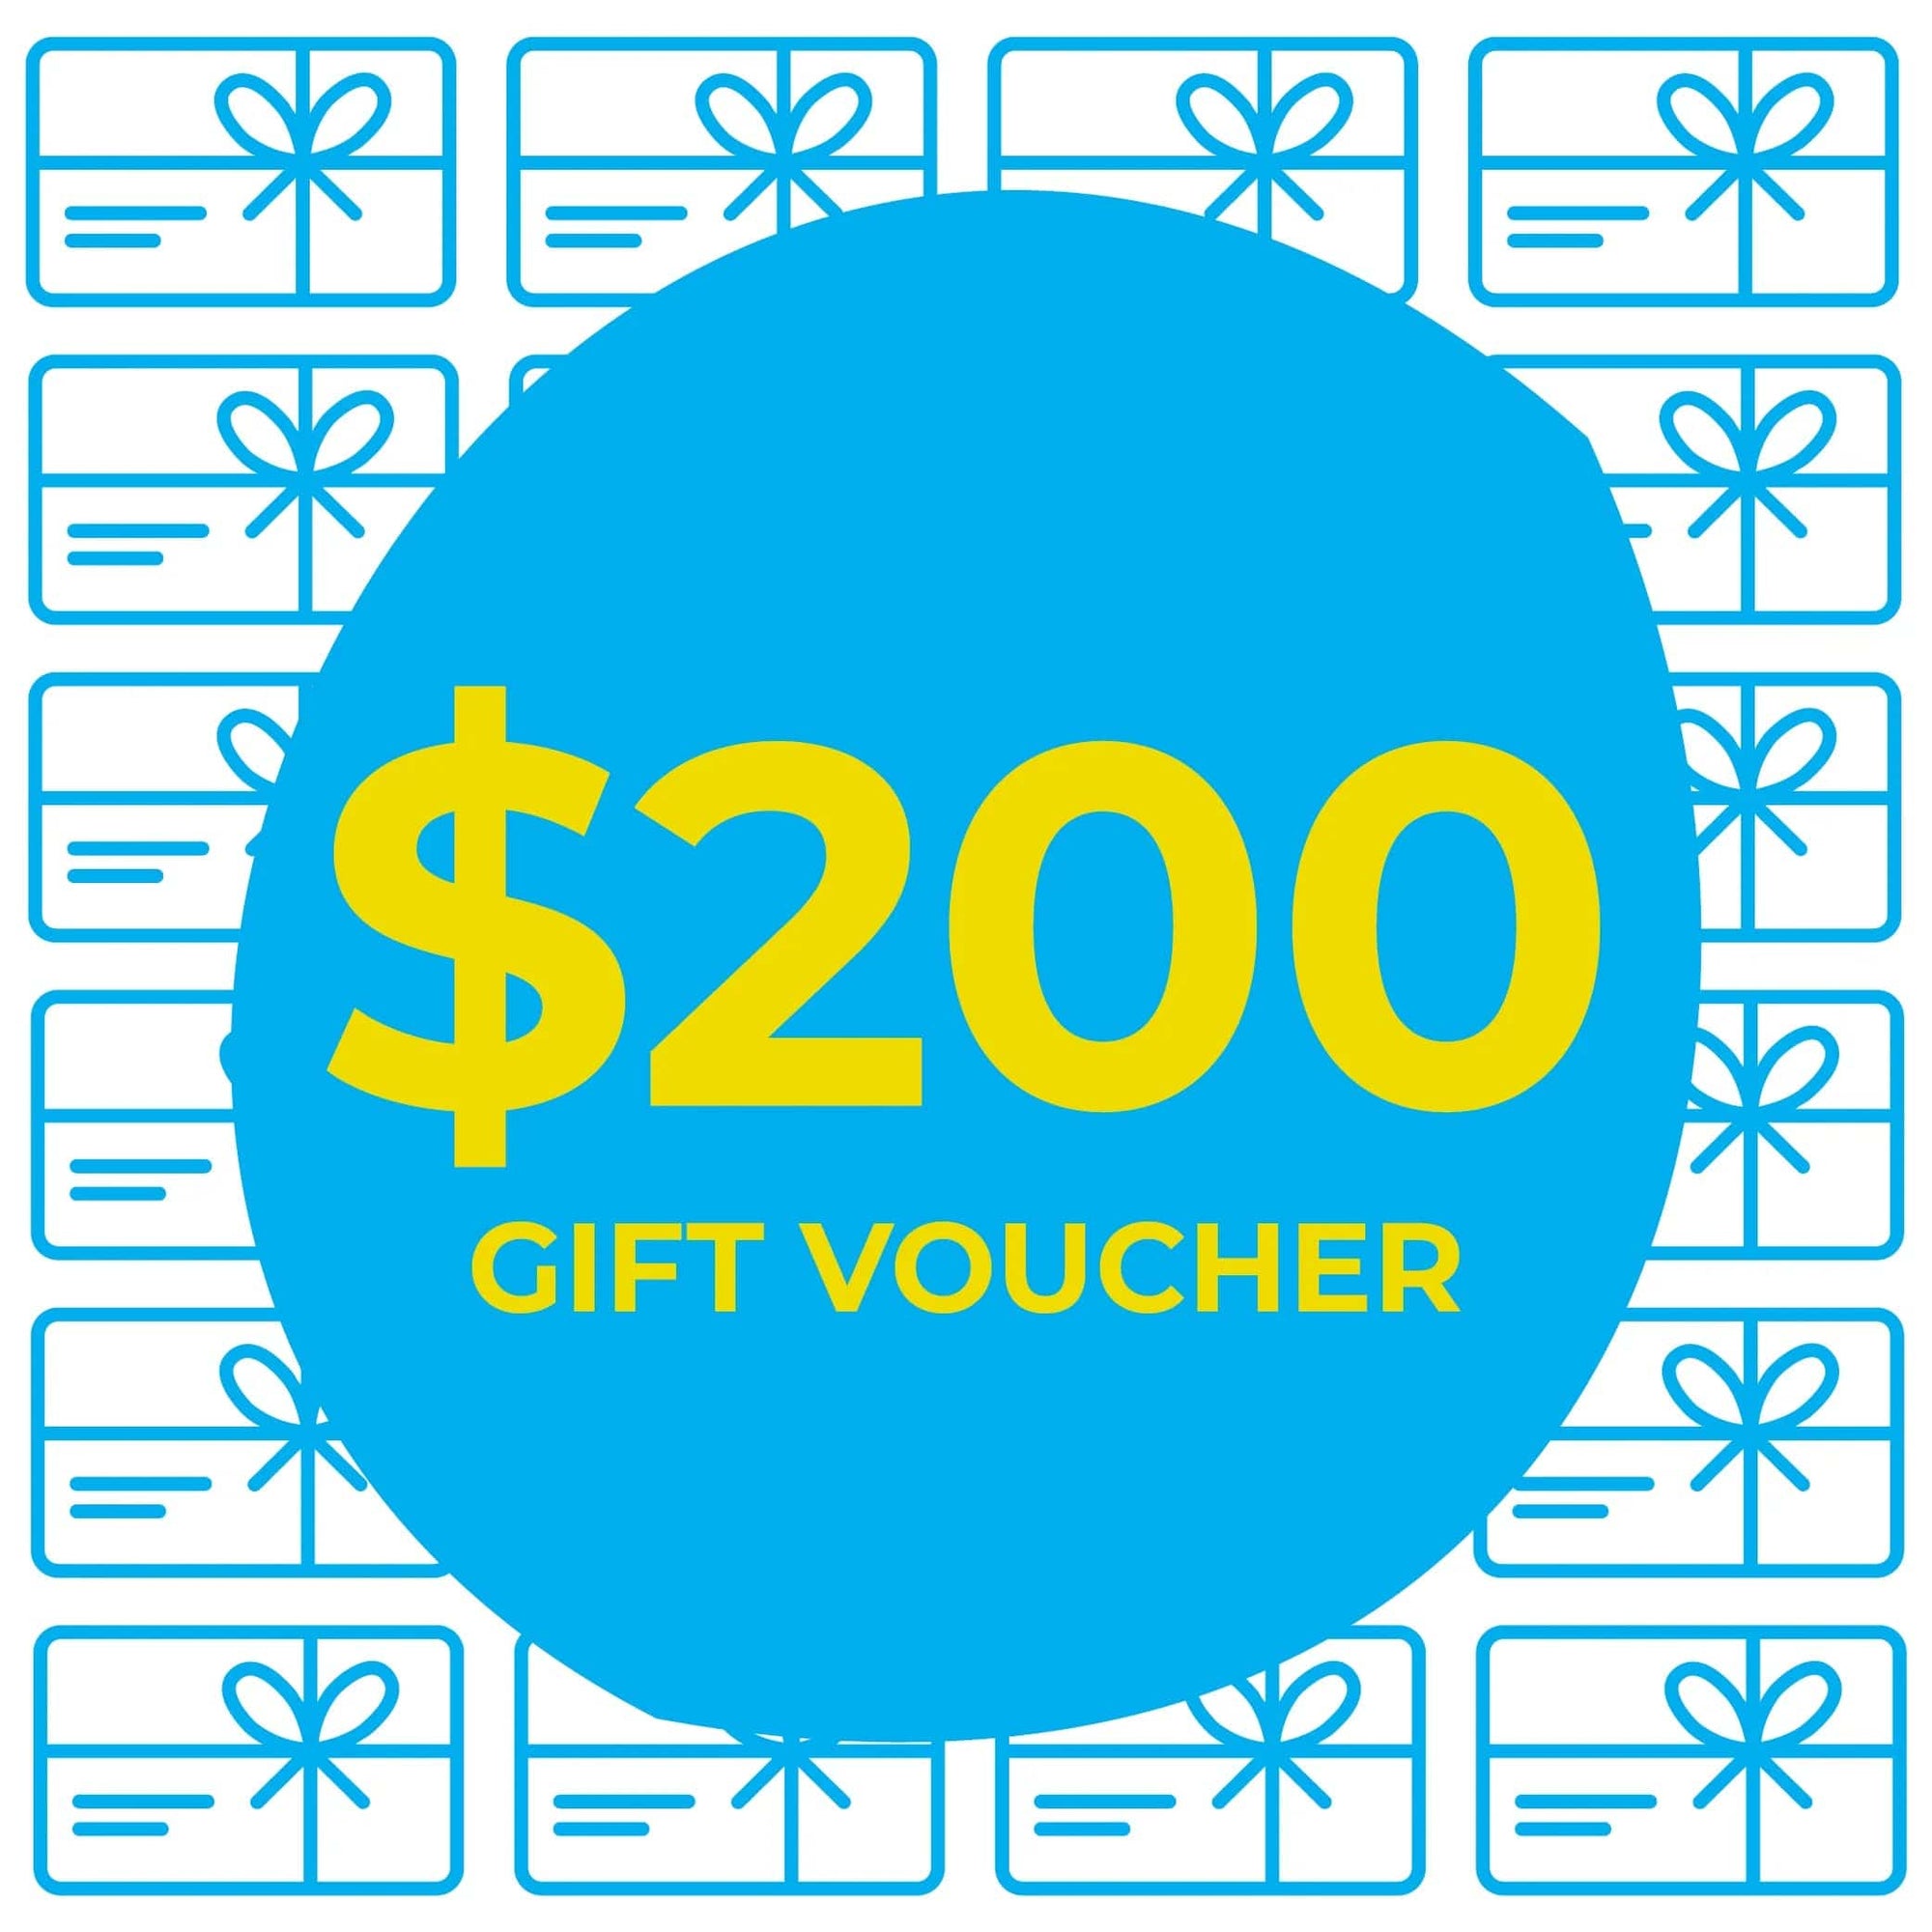 $200 Wall Art & Home Decor Accessories Voucher picket and rail